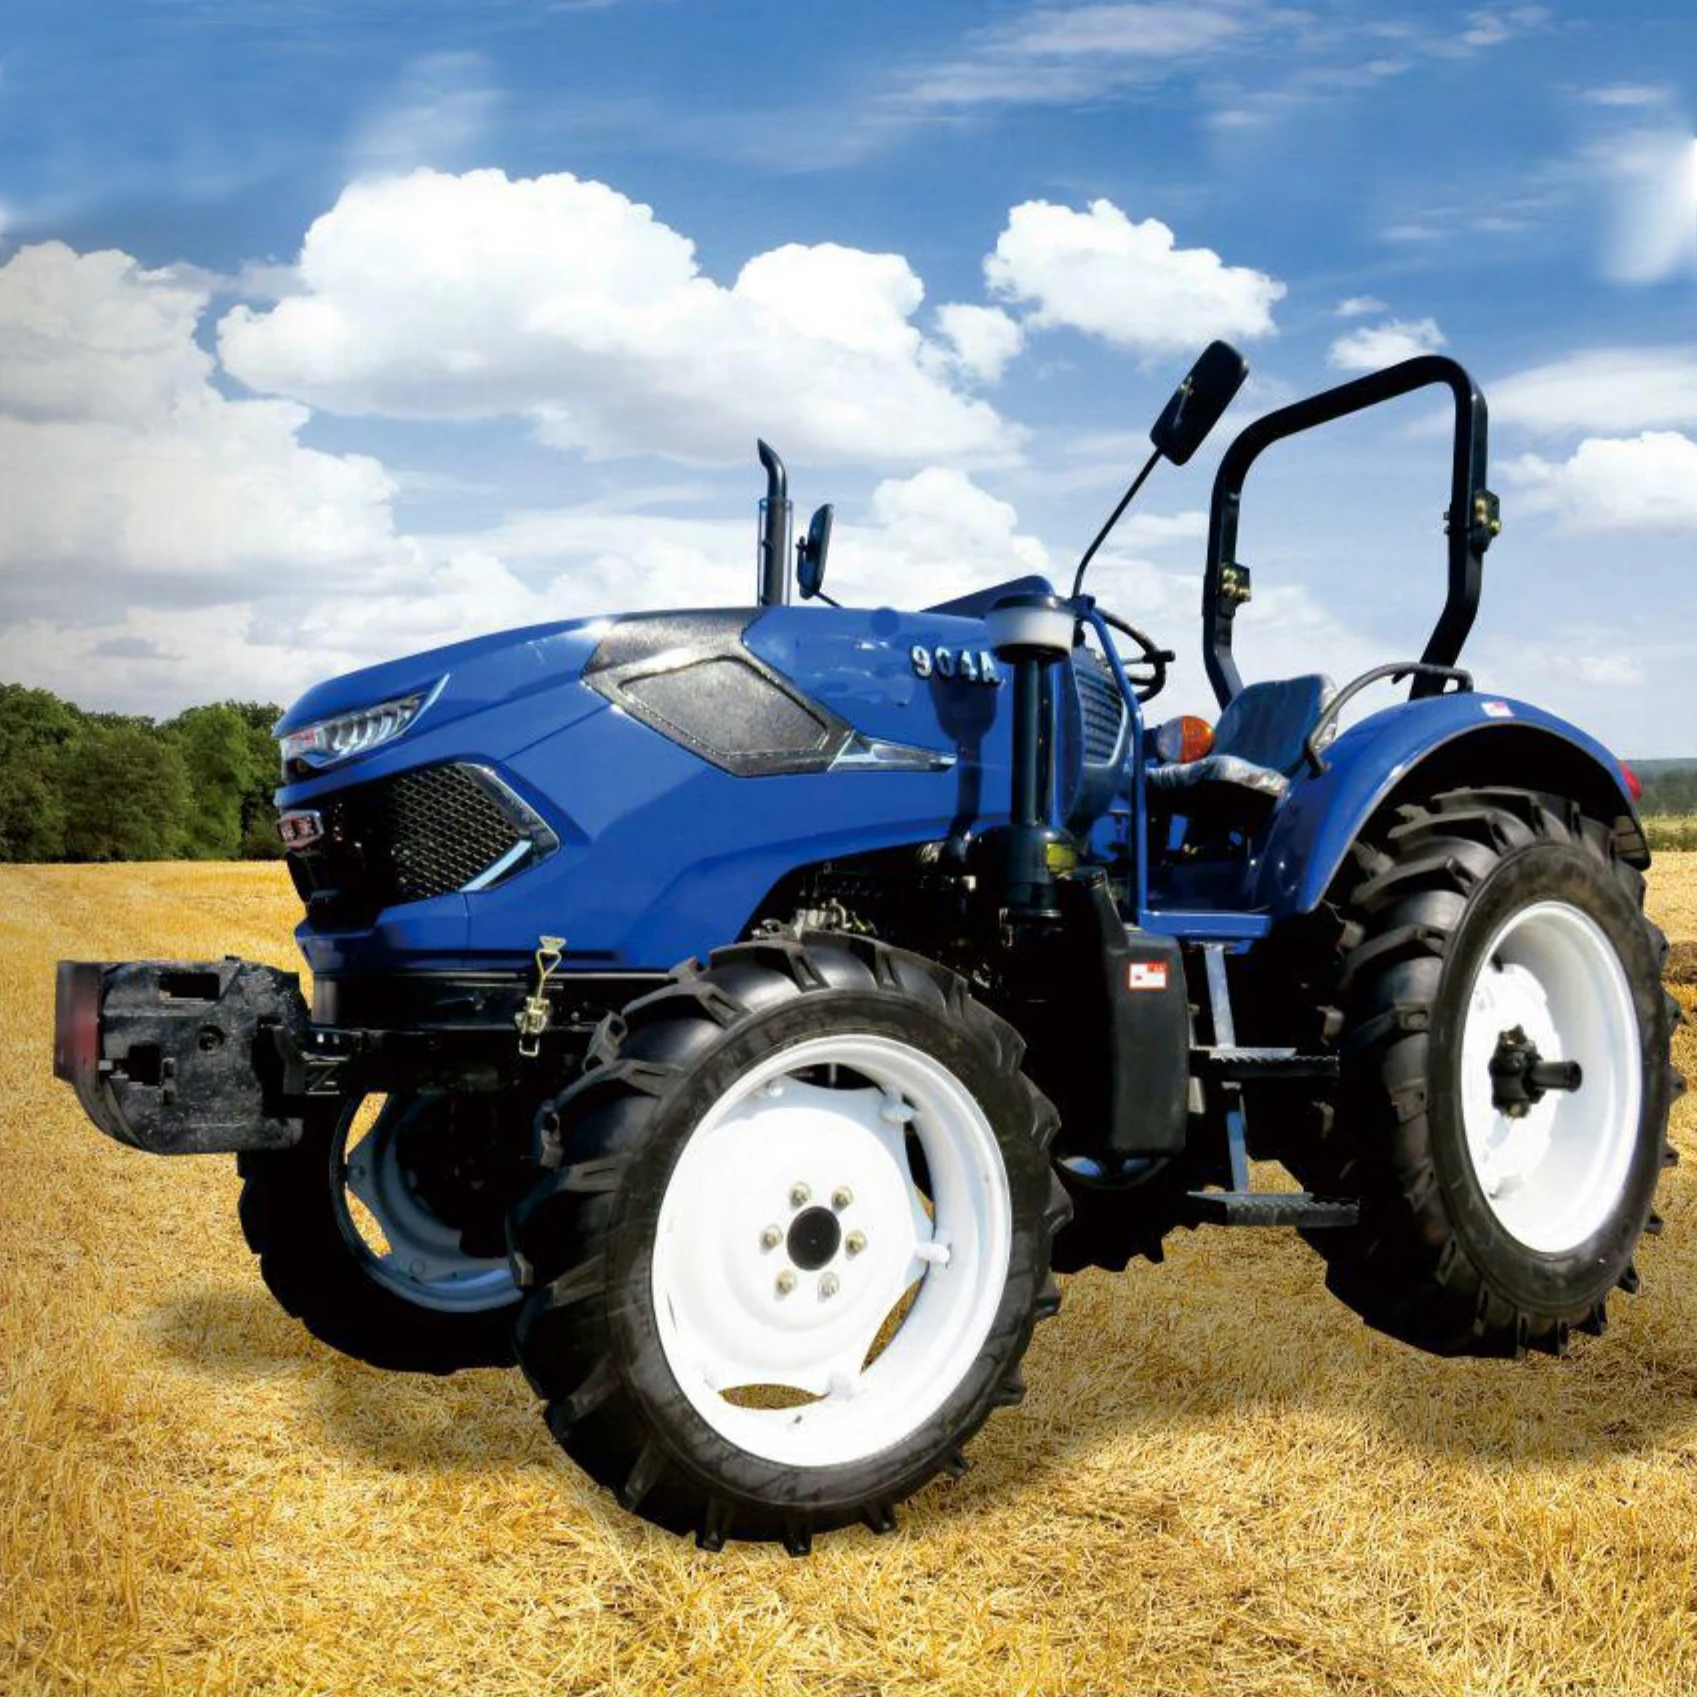 
Cheap 120 Power 4x4 Farm Tractor For Sale with auxiliary equipment 